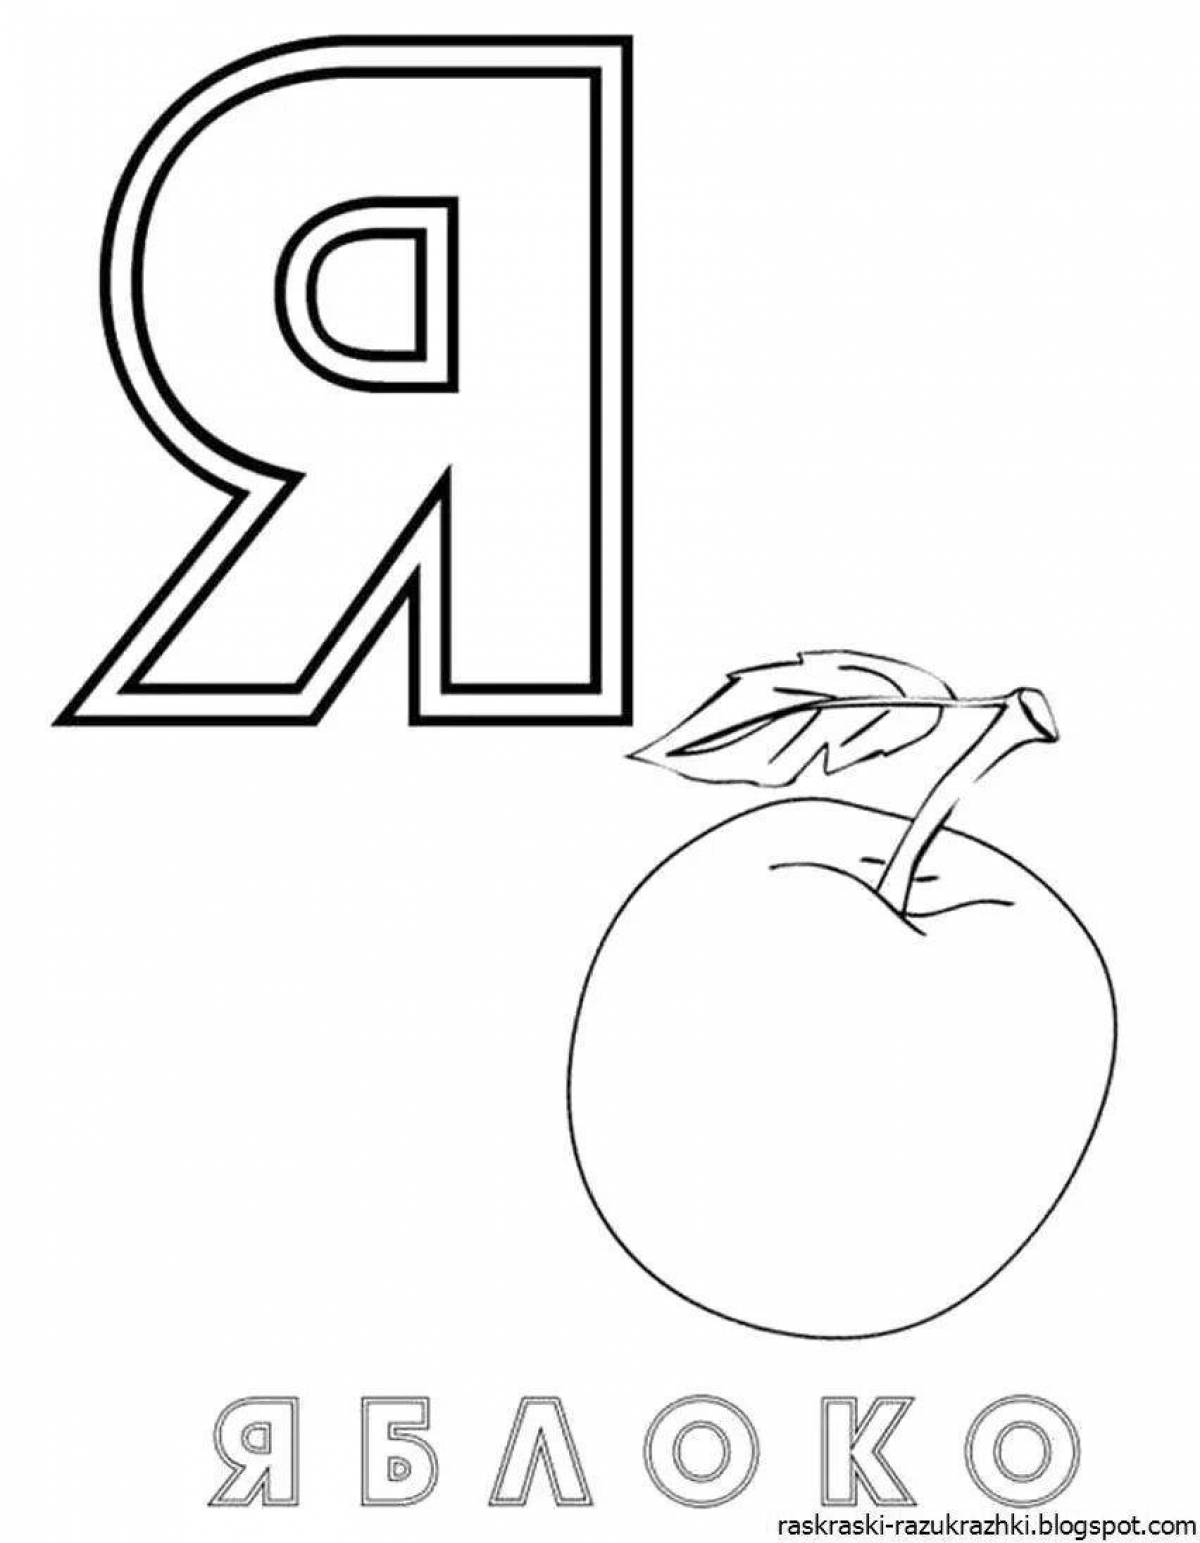 Creative alphabet coloring page for kids